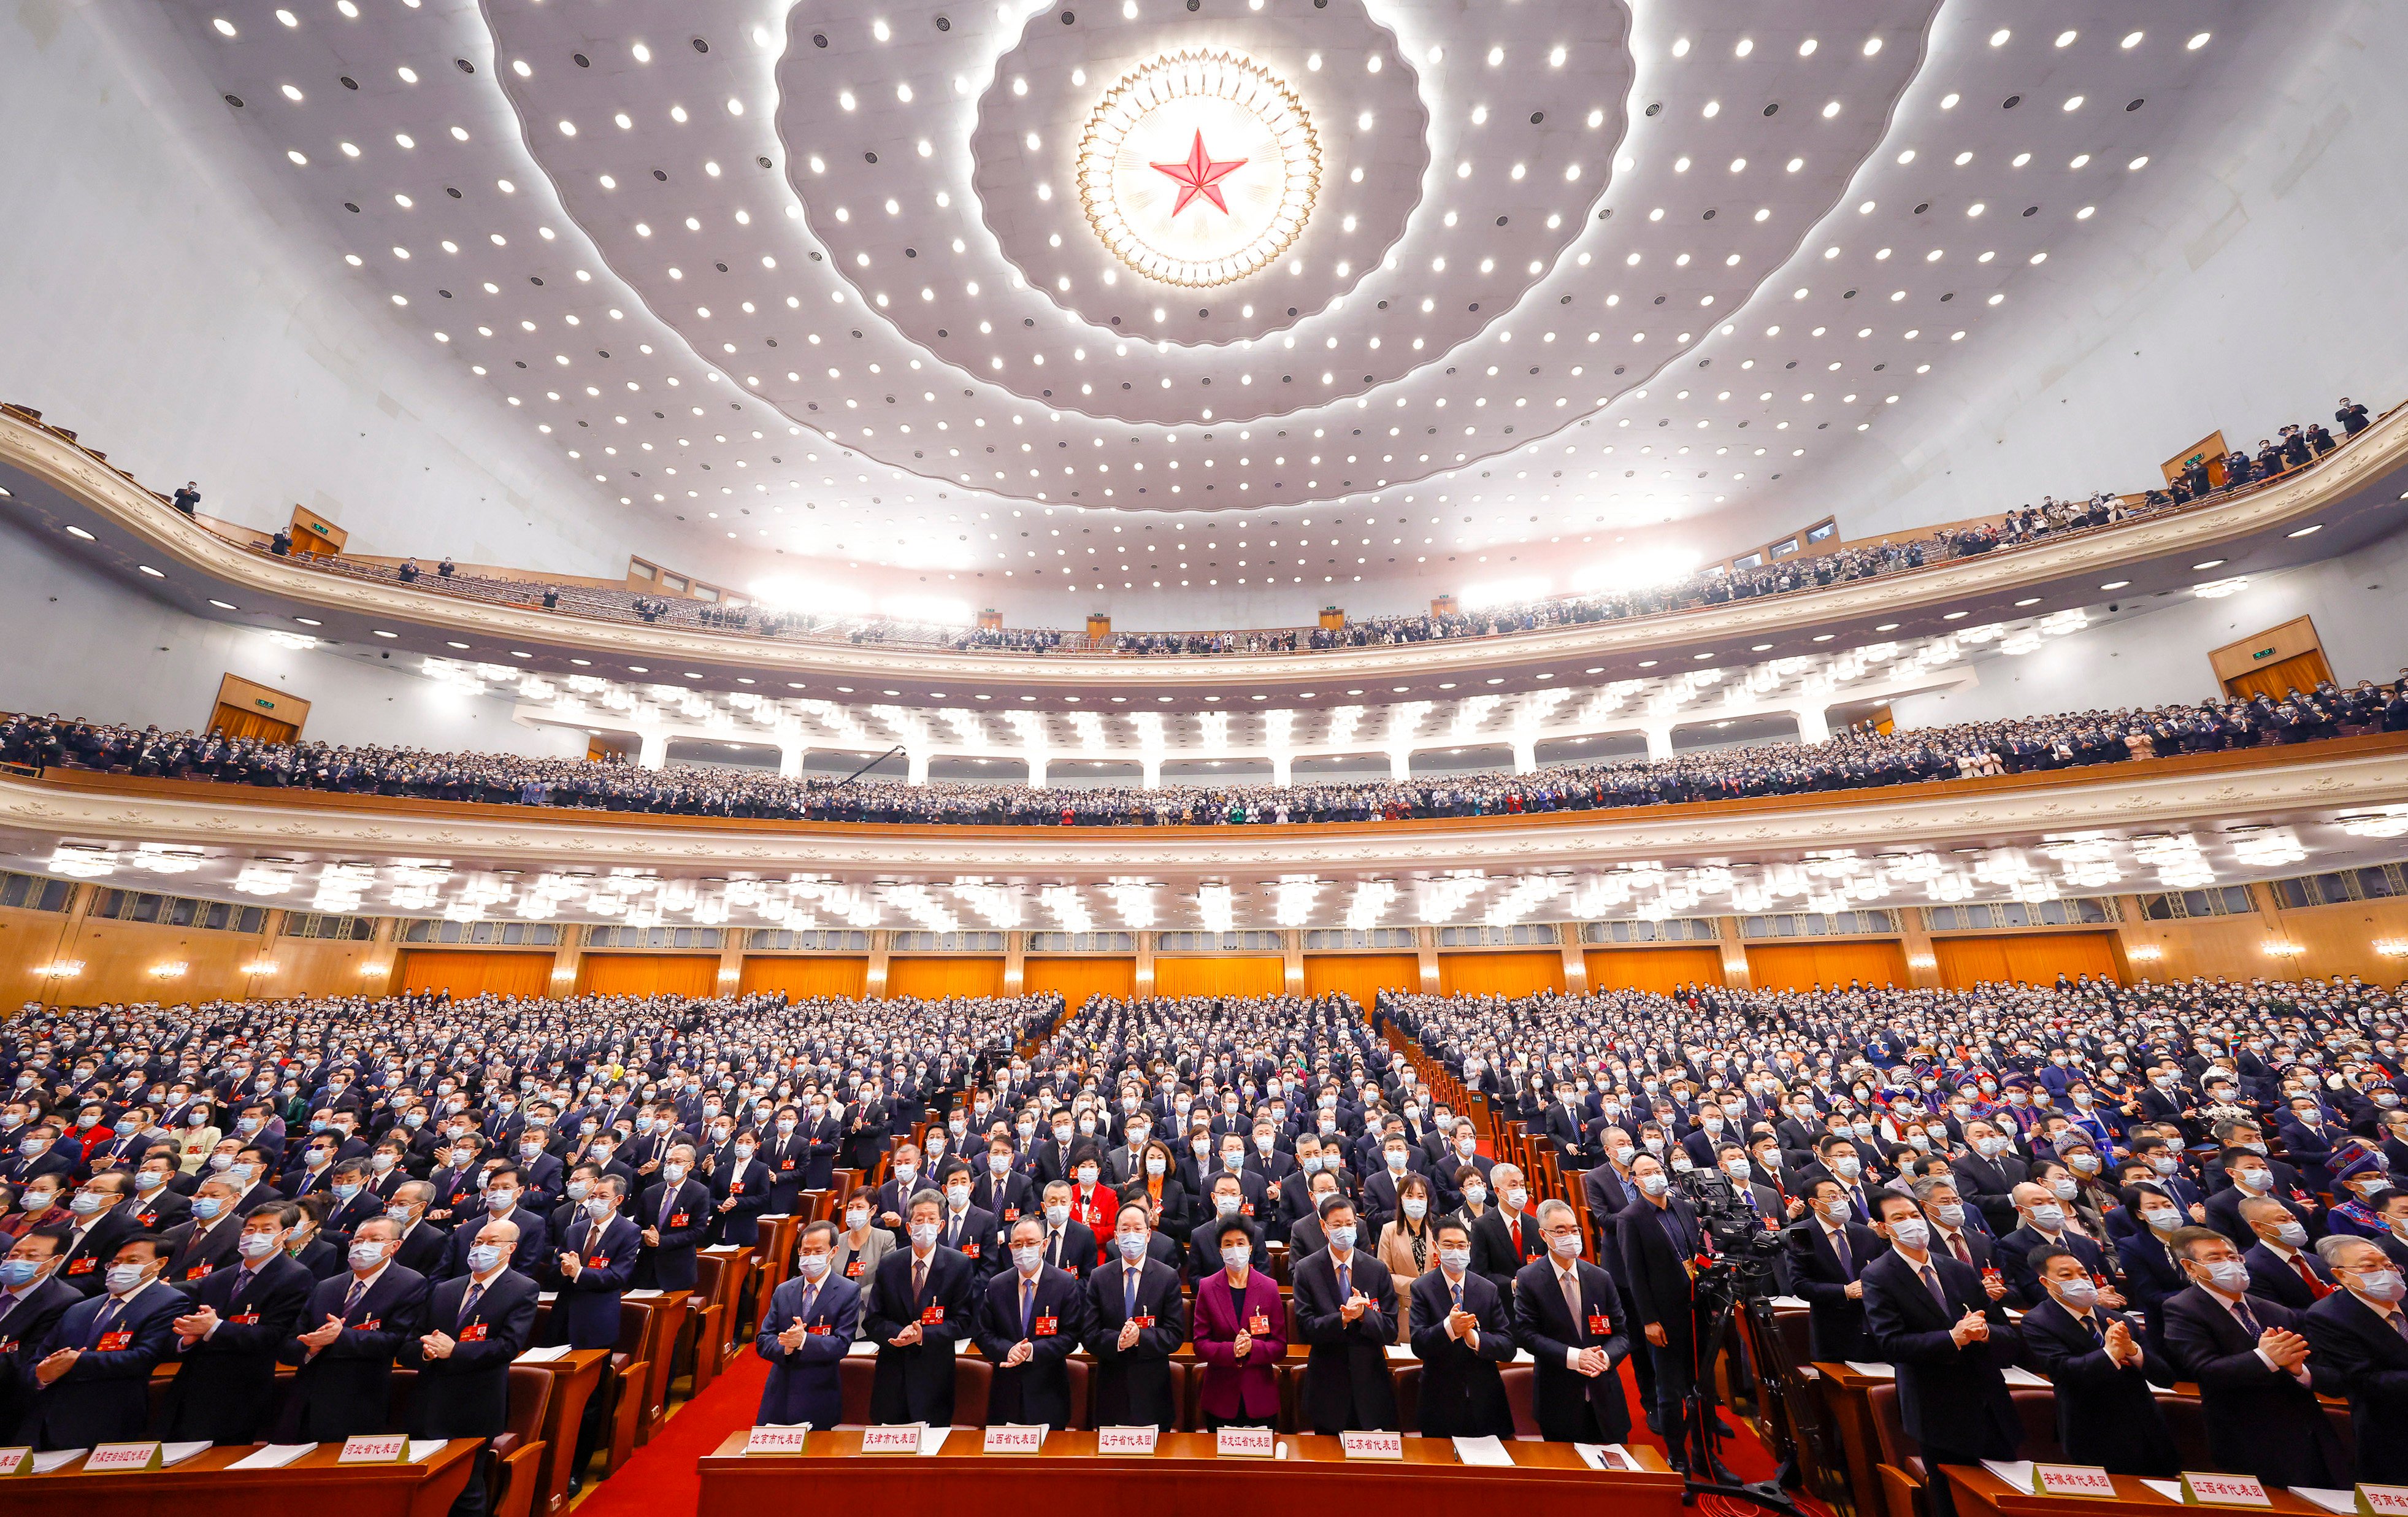 The Great Hall of the People in Beijing, packed with delegates as part of the annual “two sessions”. Photo: Xinhua